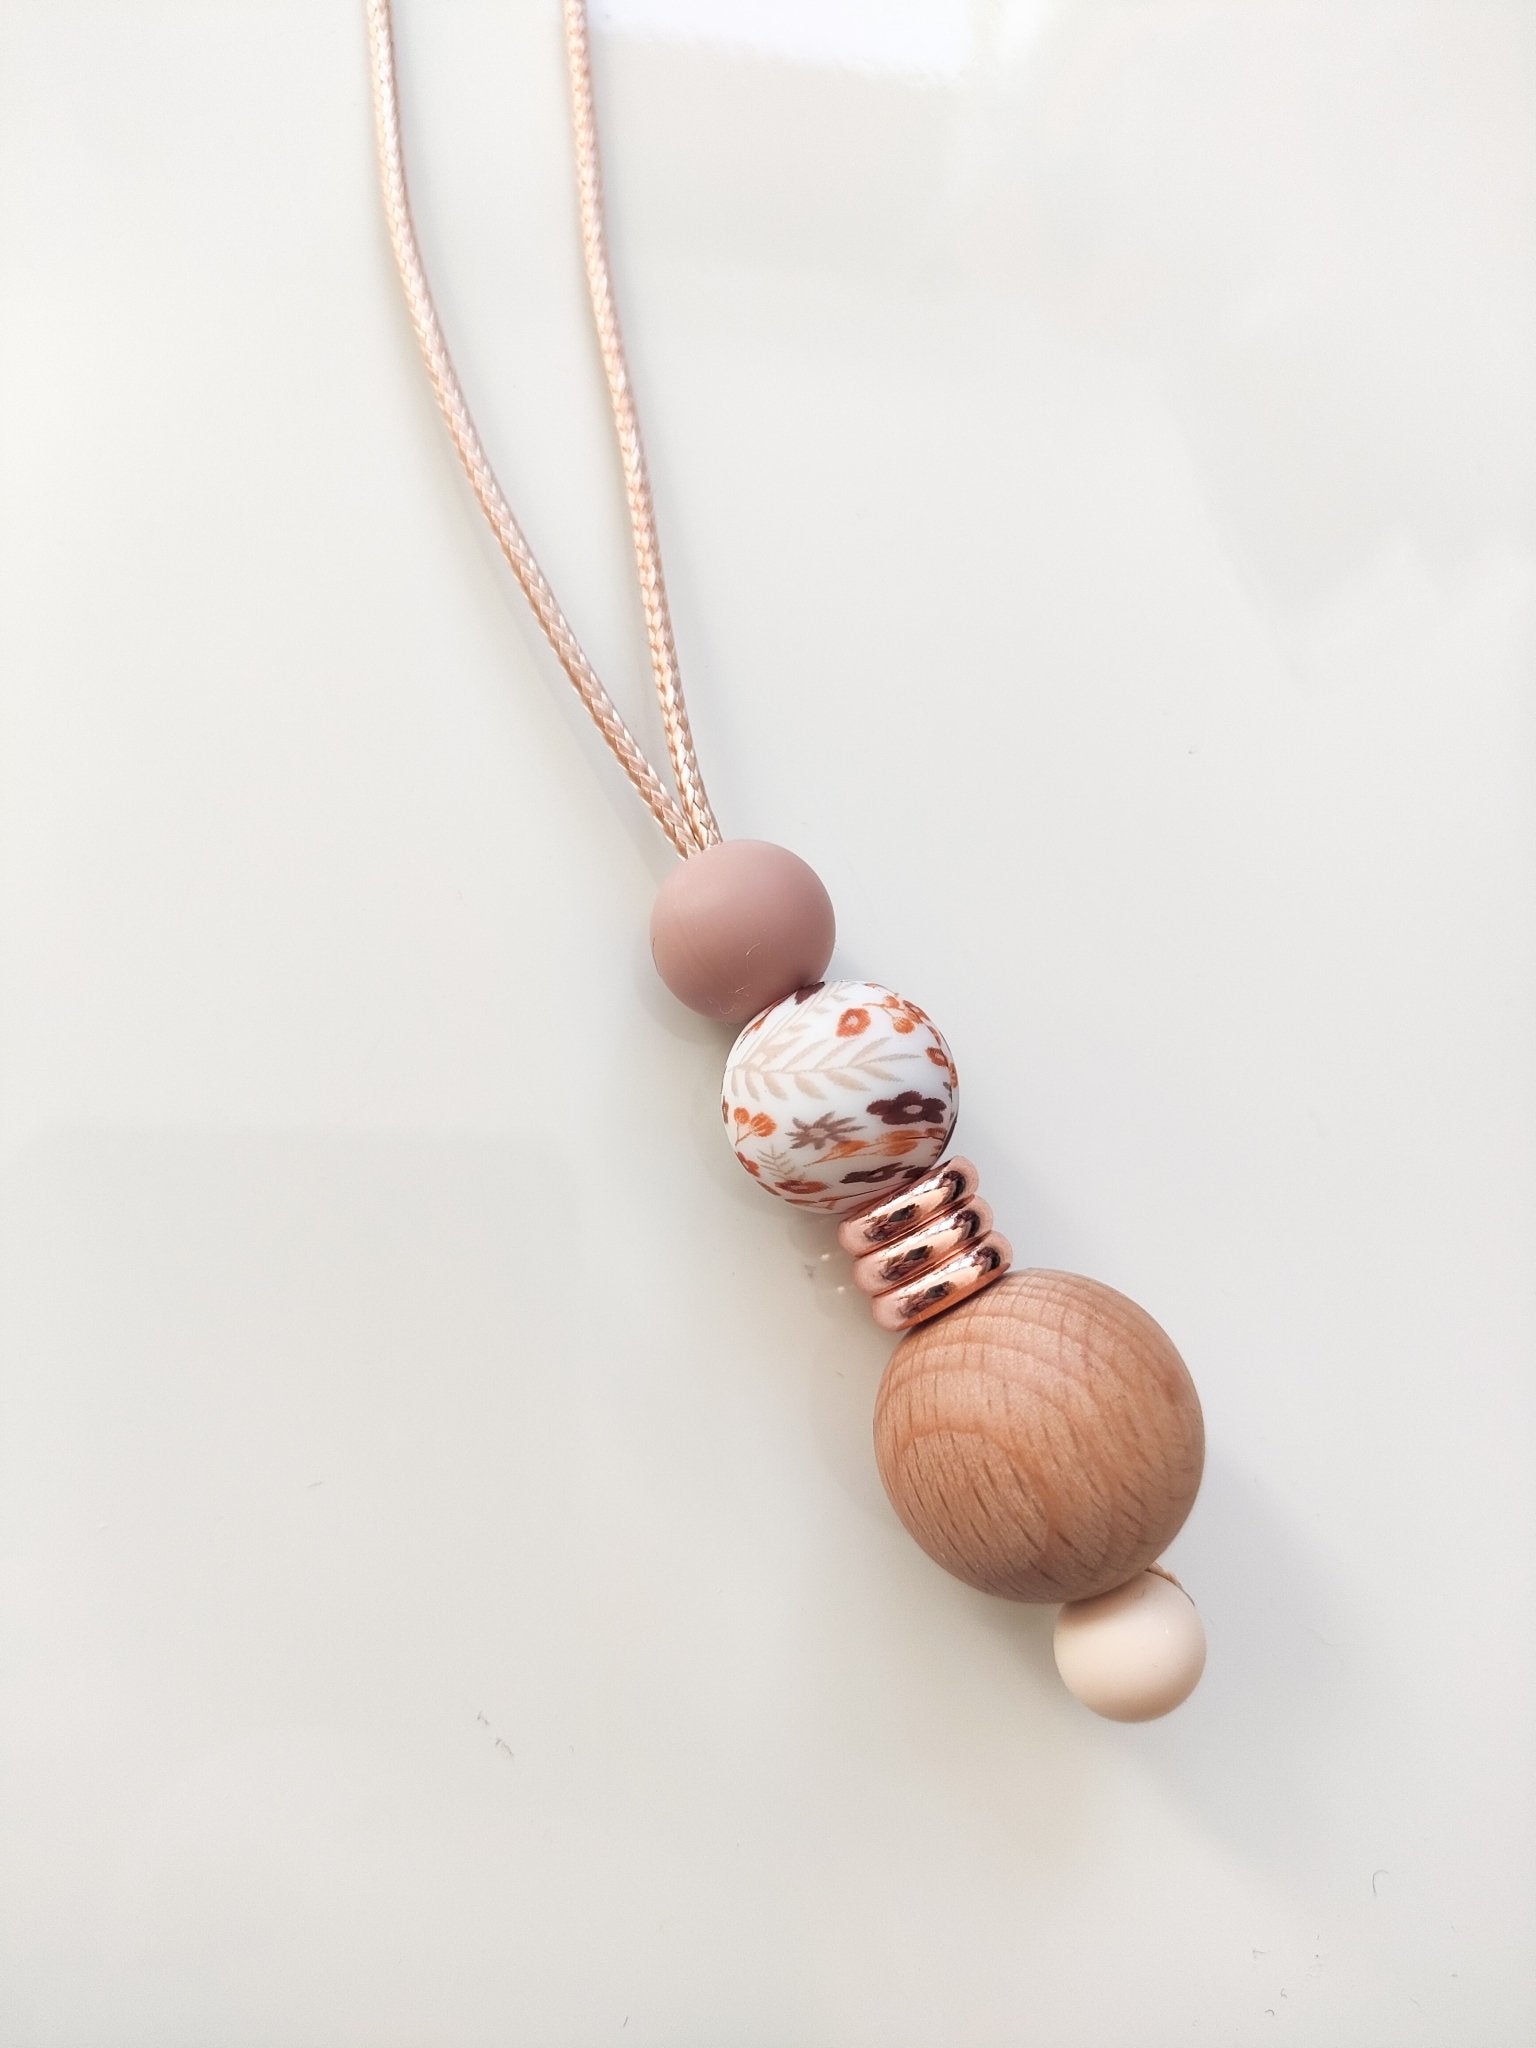 Nudes Autumn Blossom Weight Pendant - Blossy